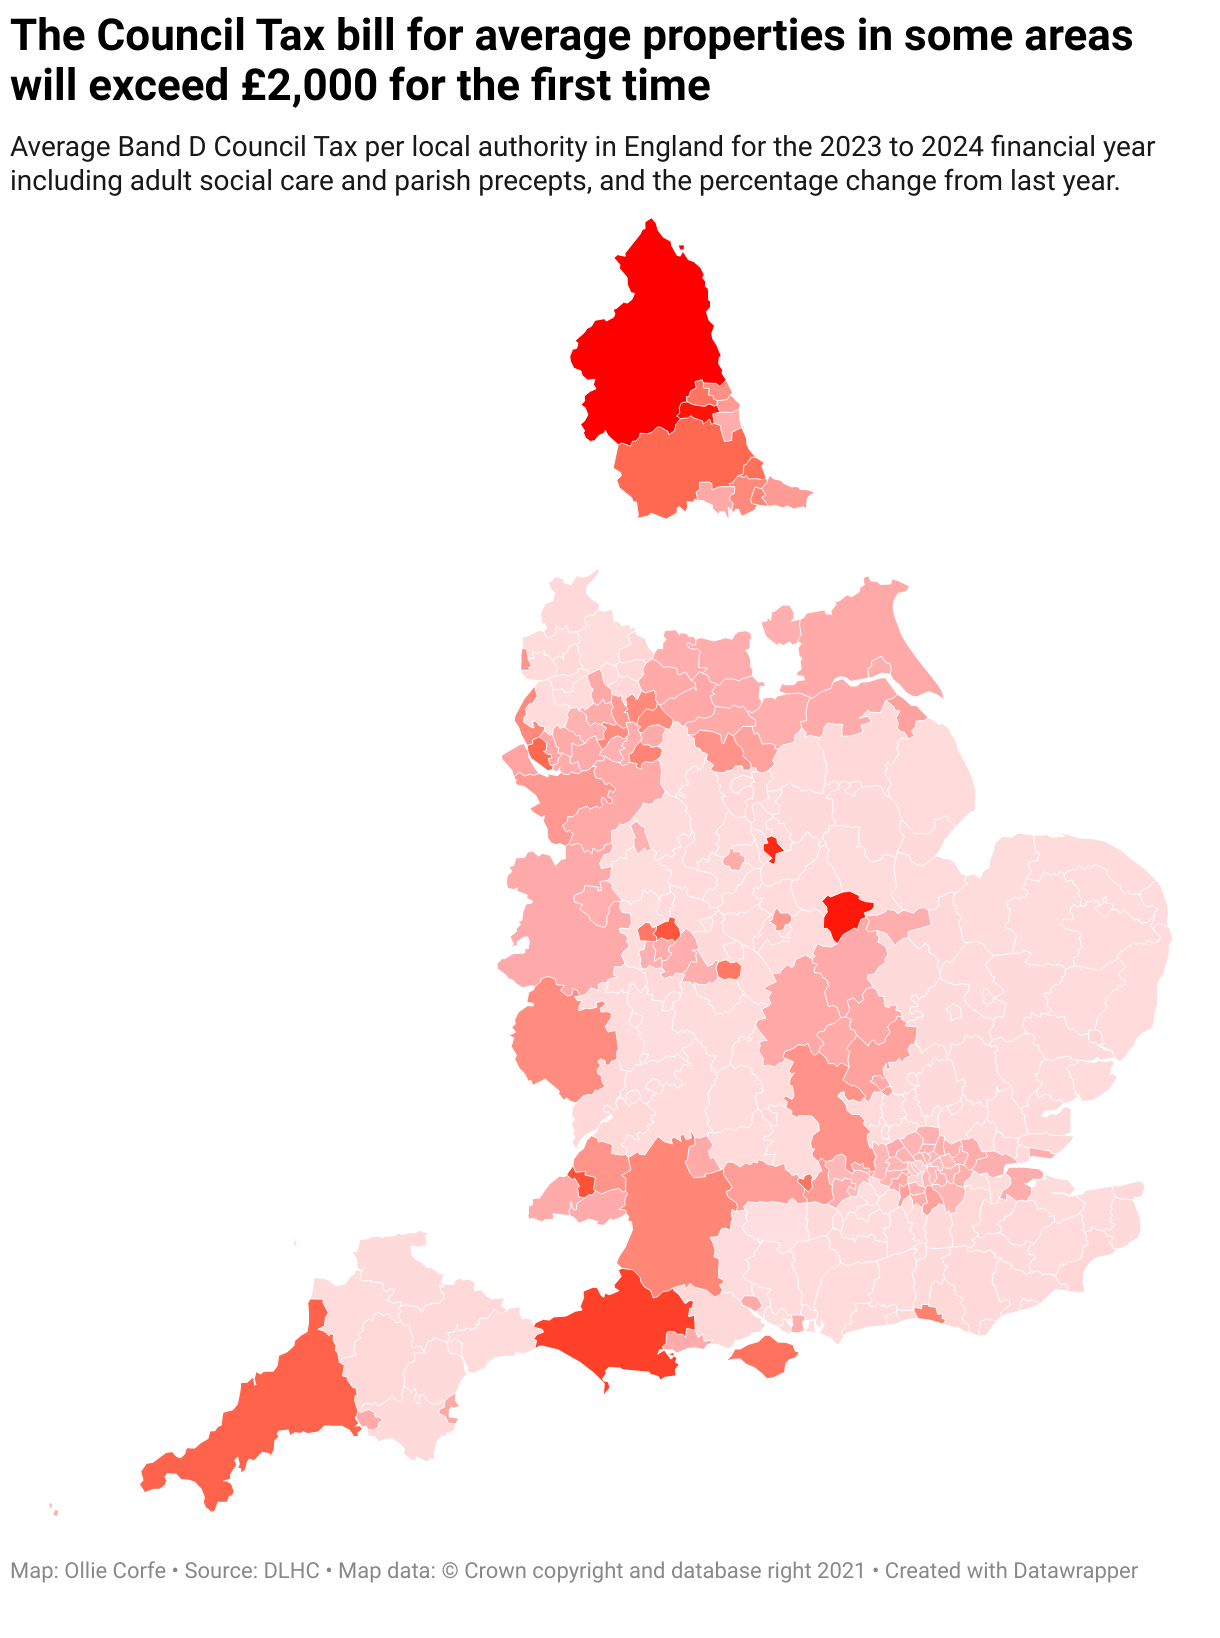 Map of Council Tax rates in England.